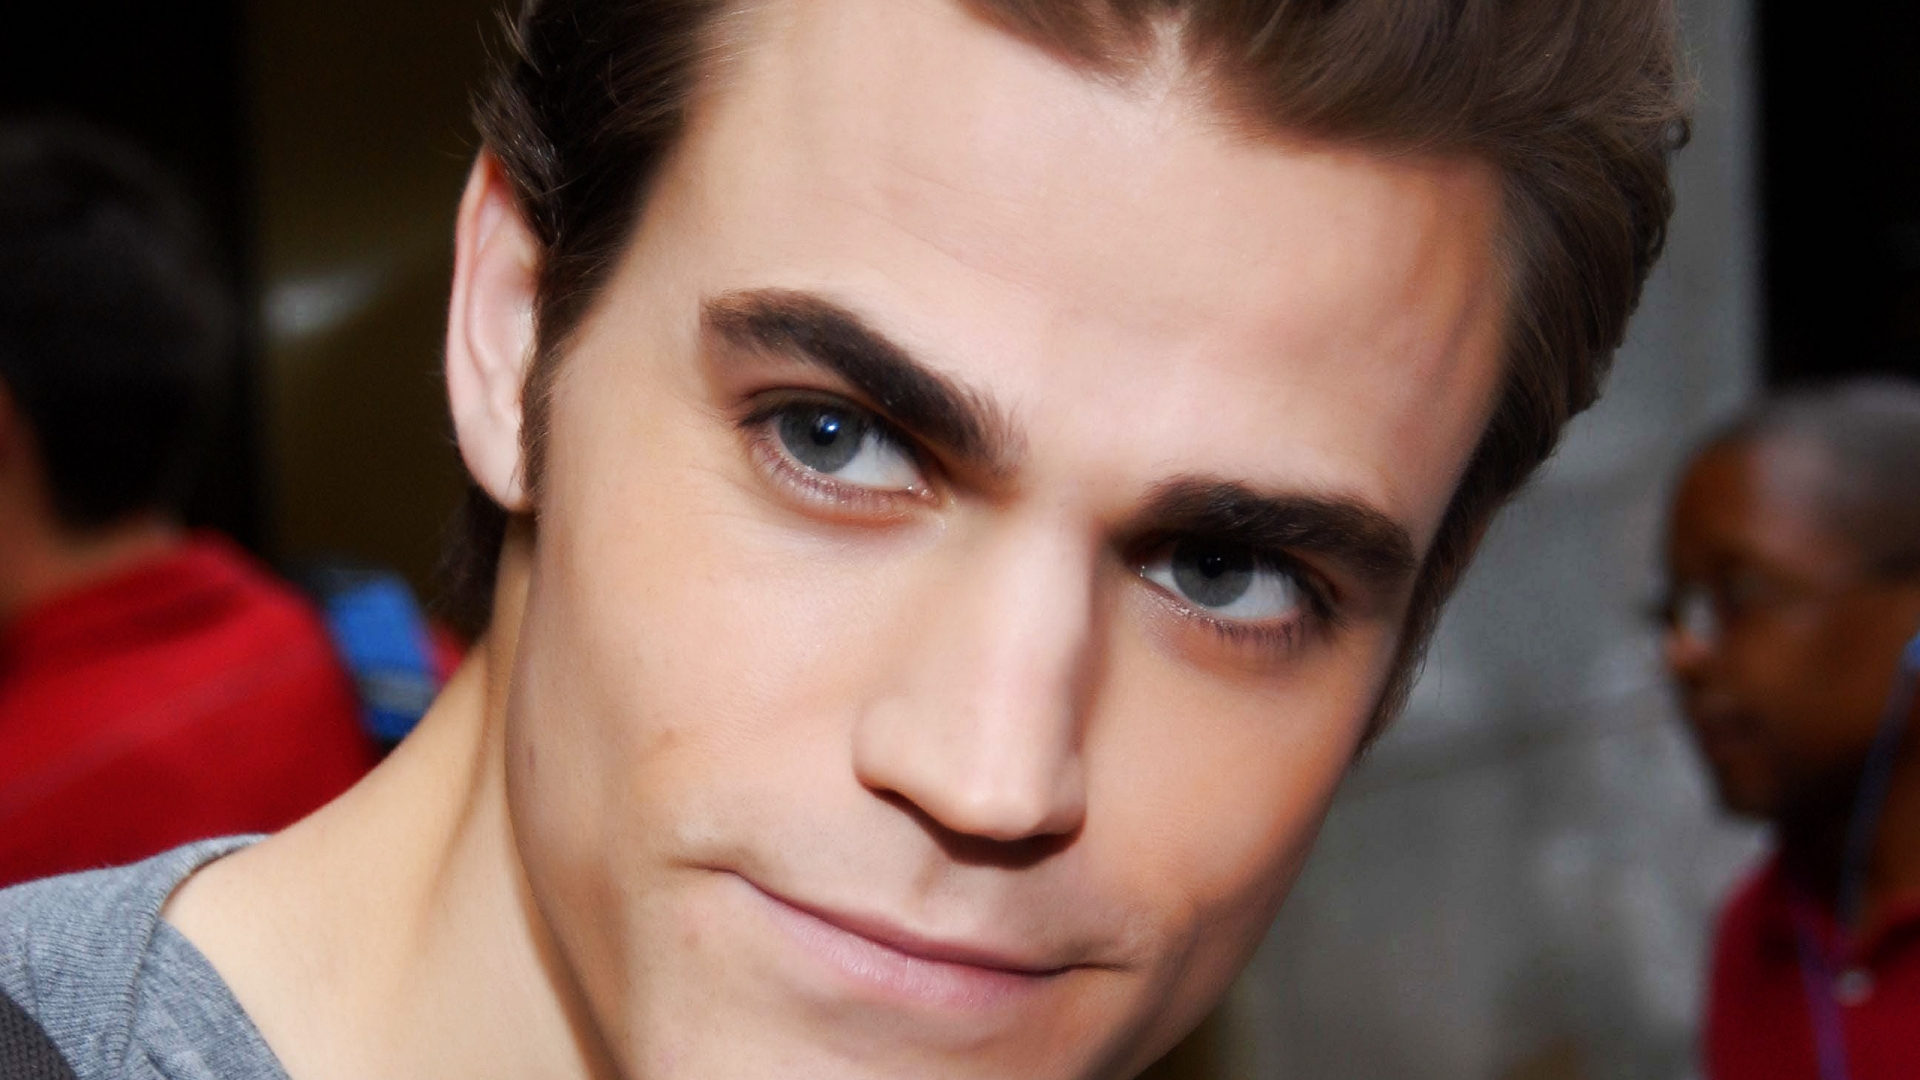 Paul Wesley Close Up for 1920 x 1080 HDTV 1080p resolution